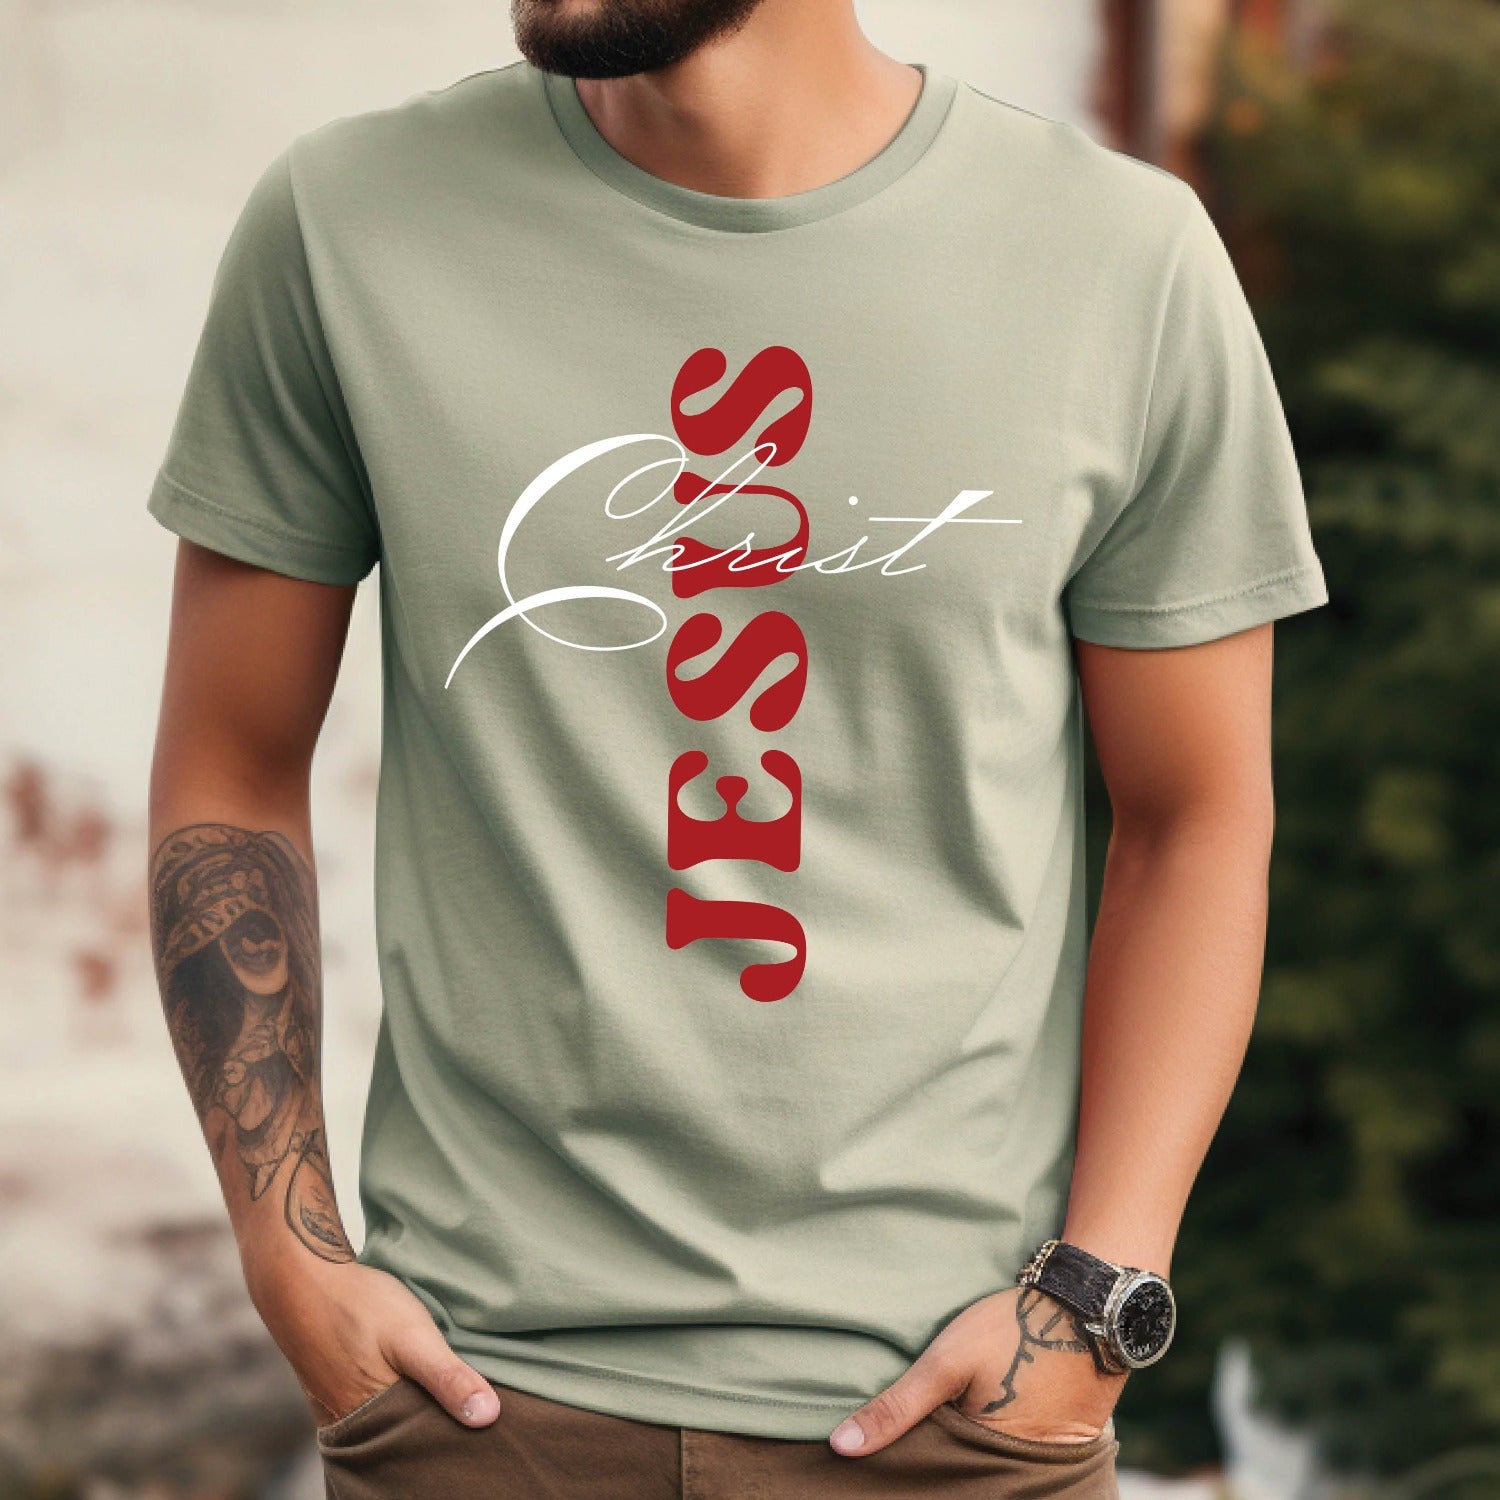 Christian man wearing a Bay sage green color Comfort Colors 1717 heavyweight unisex t-shirt with faith-based bible typography that says, "Jesus Christ" and white and red letters in the shape of the cross, created for men and women Kingdom believers